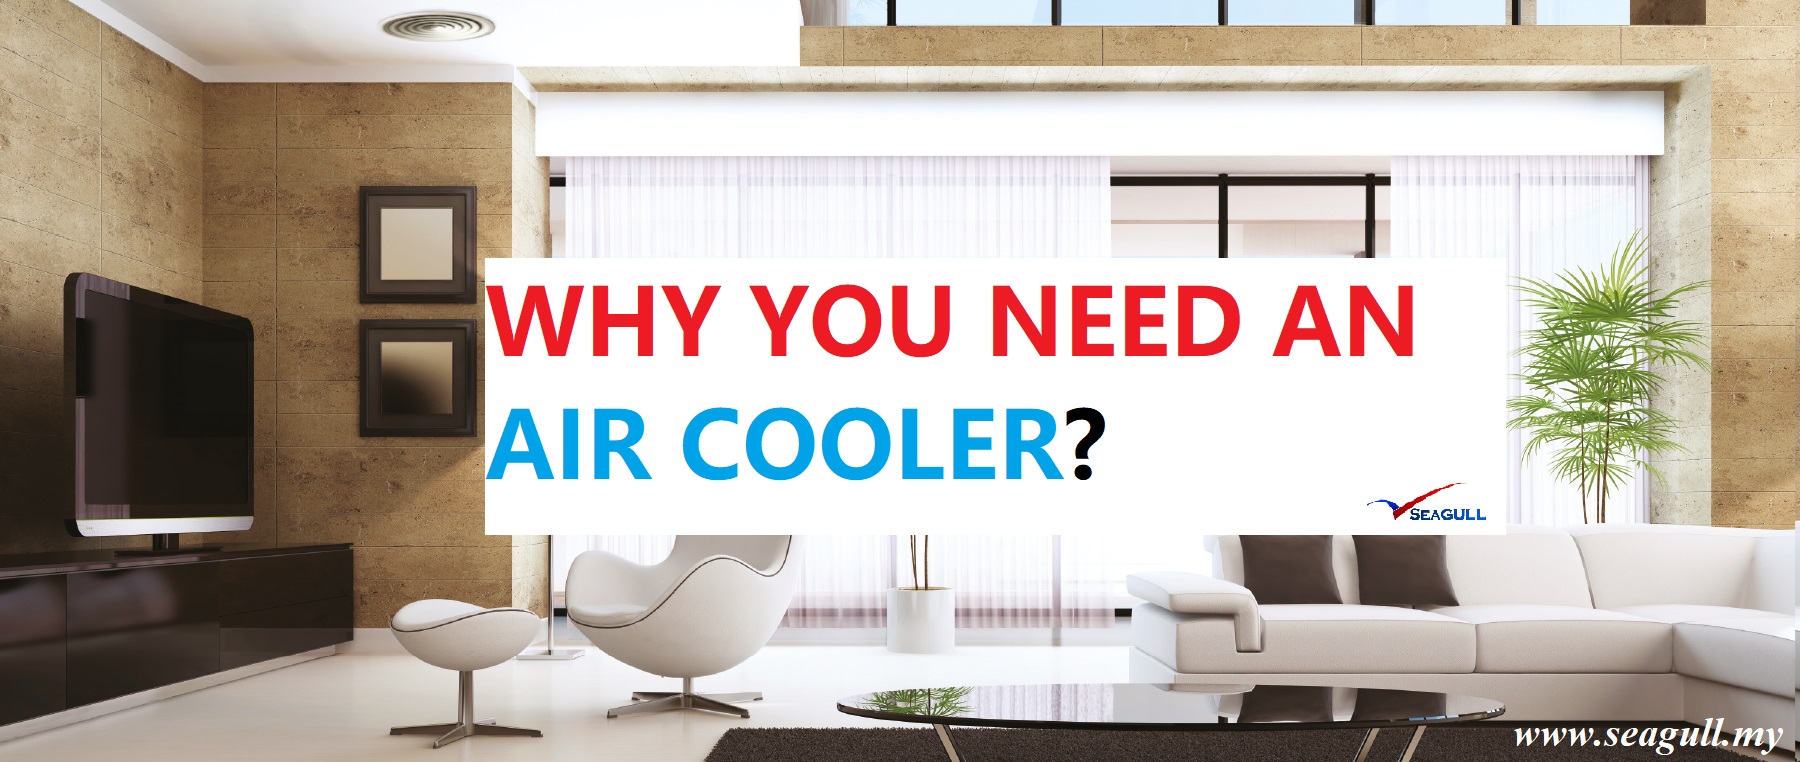 Why You Need An Air Cooler Seagull My Aircon Supplier